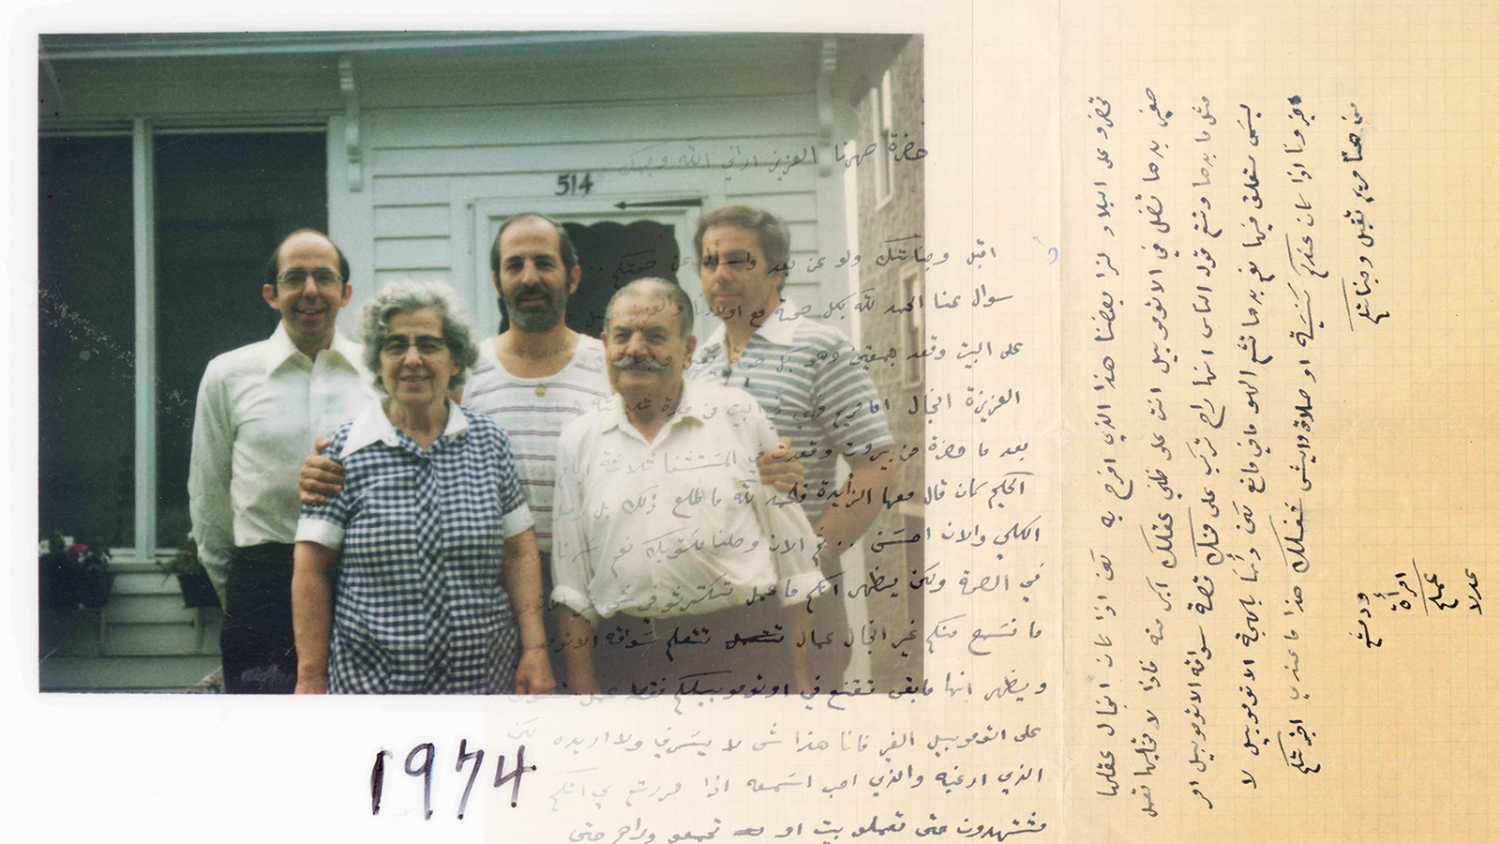 Family photo on porch steps with handwritten letter superimposed on top